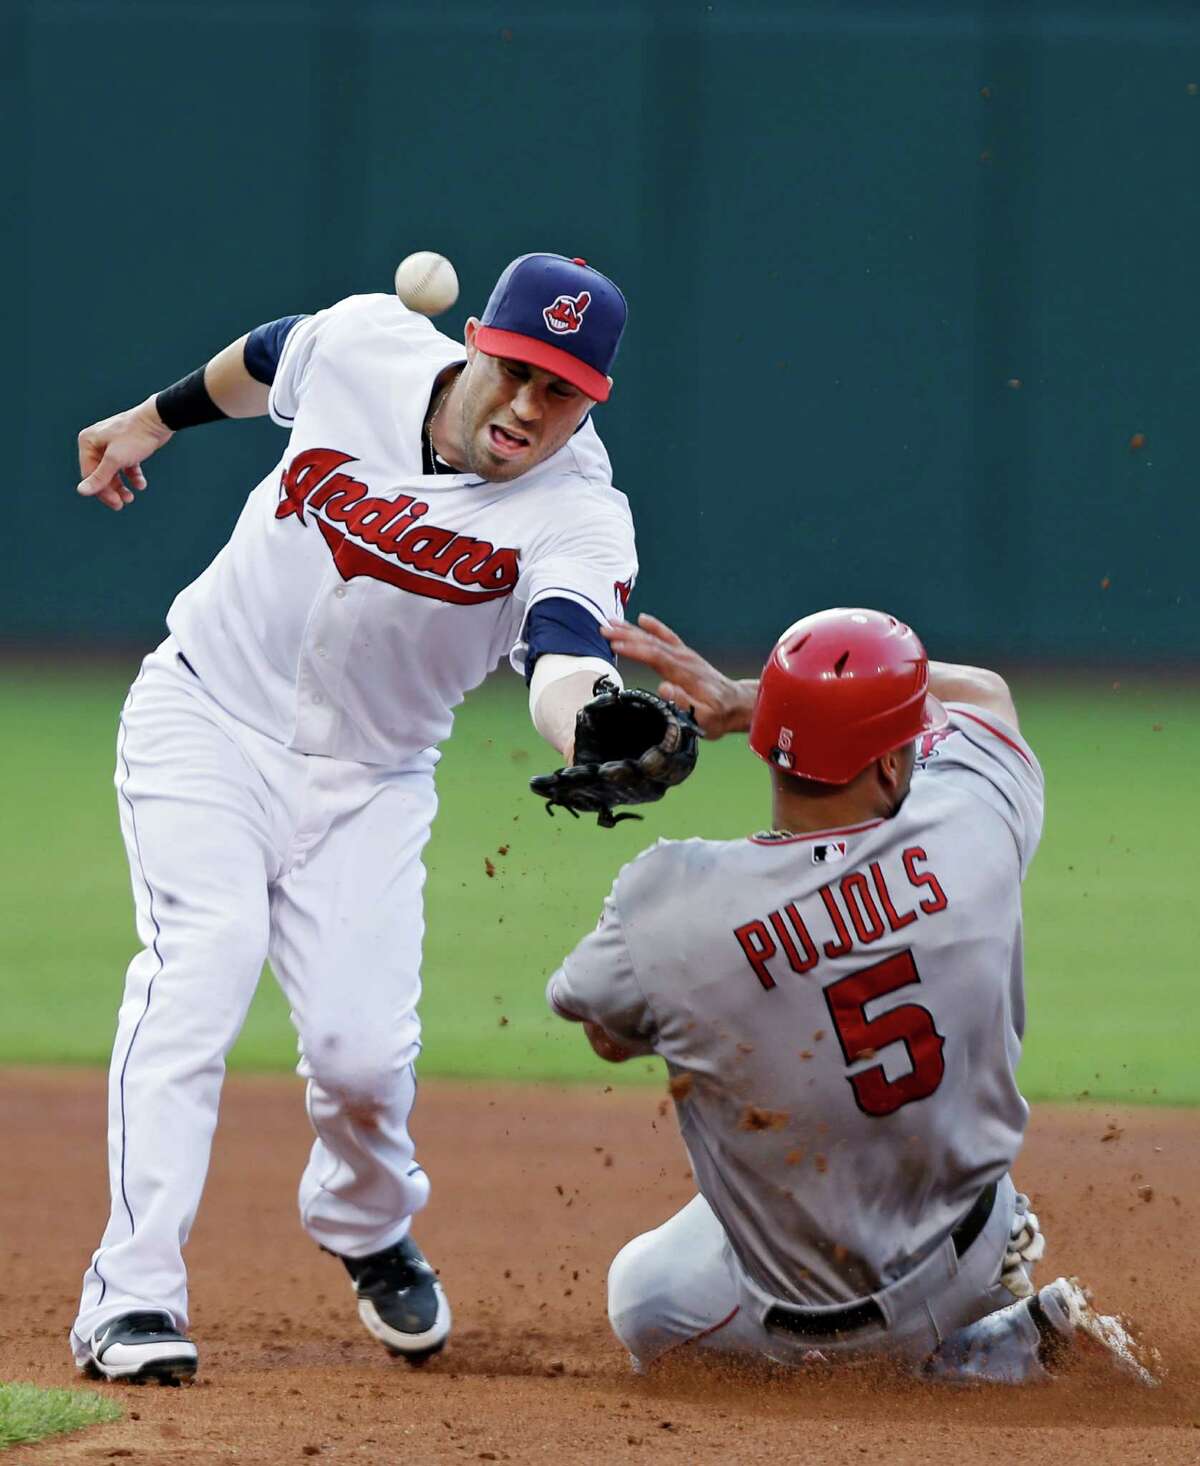 Los Angeles Angels' Albert Pujols (5) steals second base as the throw hits his shoulder and ricochets past Cleveland Indians second baseman Jason Kipnis in the fourth inning of a baseball game Monday, July 2, 2012, in Cleveland.